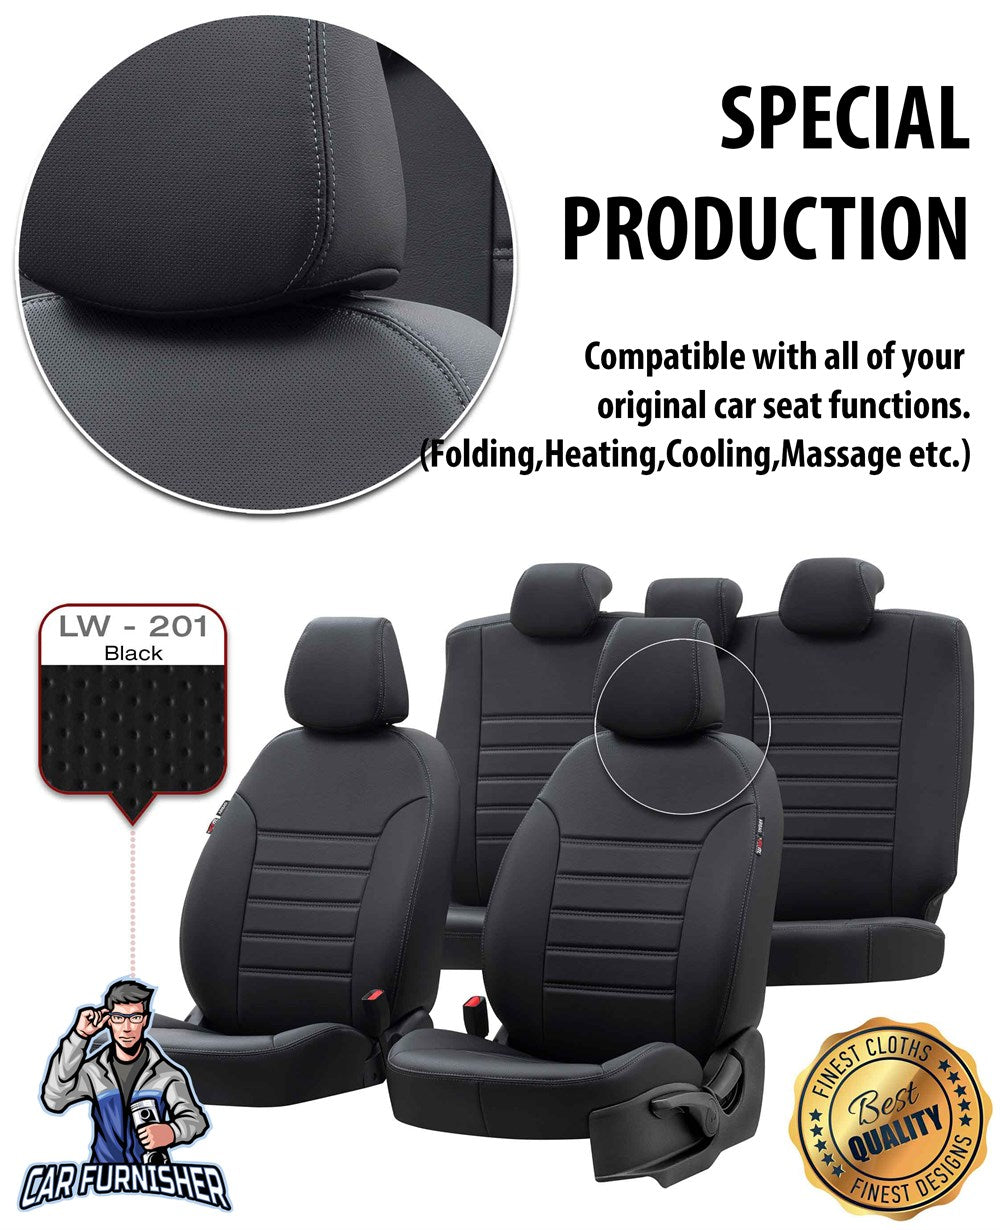 Mercedes Vaneo Seat Cover Istanbul Leather Design Smoked Black Leather